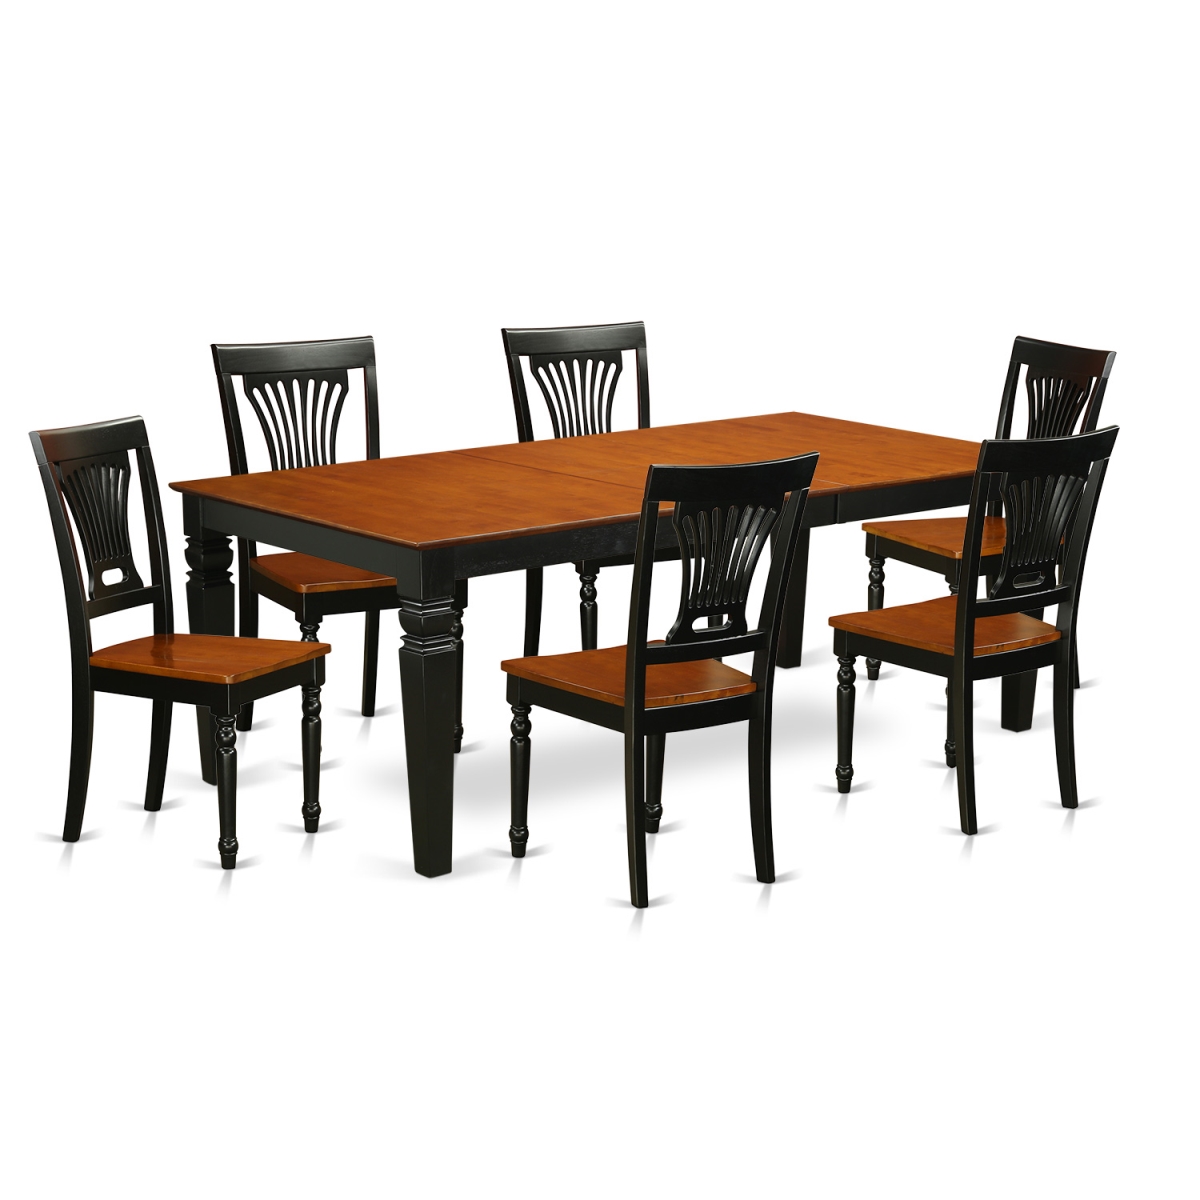 LGPL7-BCH-W Wood Seat Kitchen Table Set with One Logan Dining Table & 6 Chairs, Black & Cherry - 7 Piece -  East West Furniture